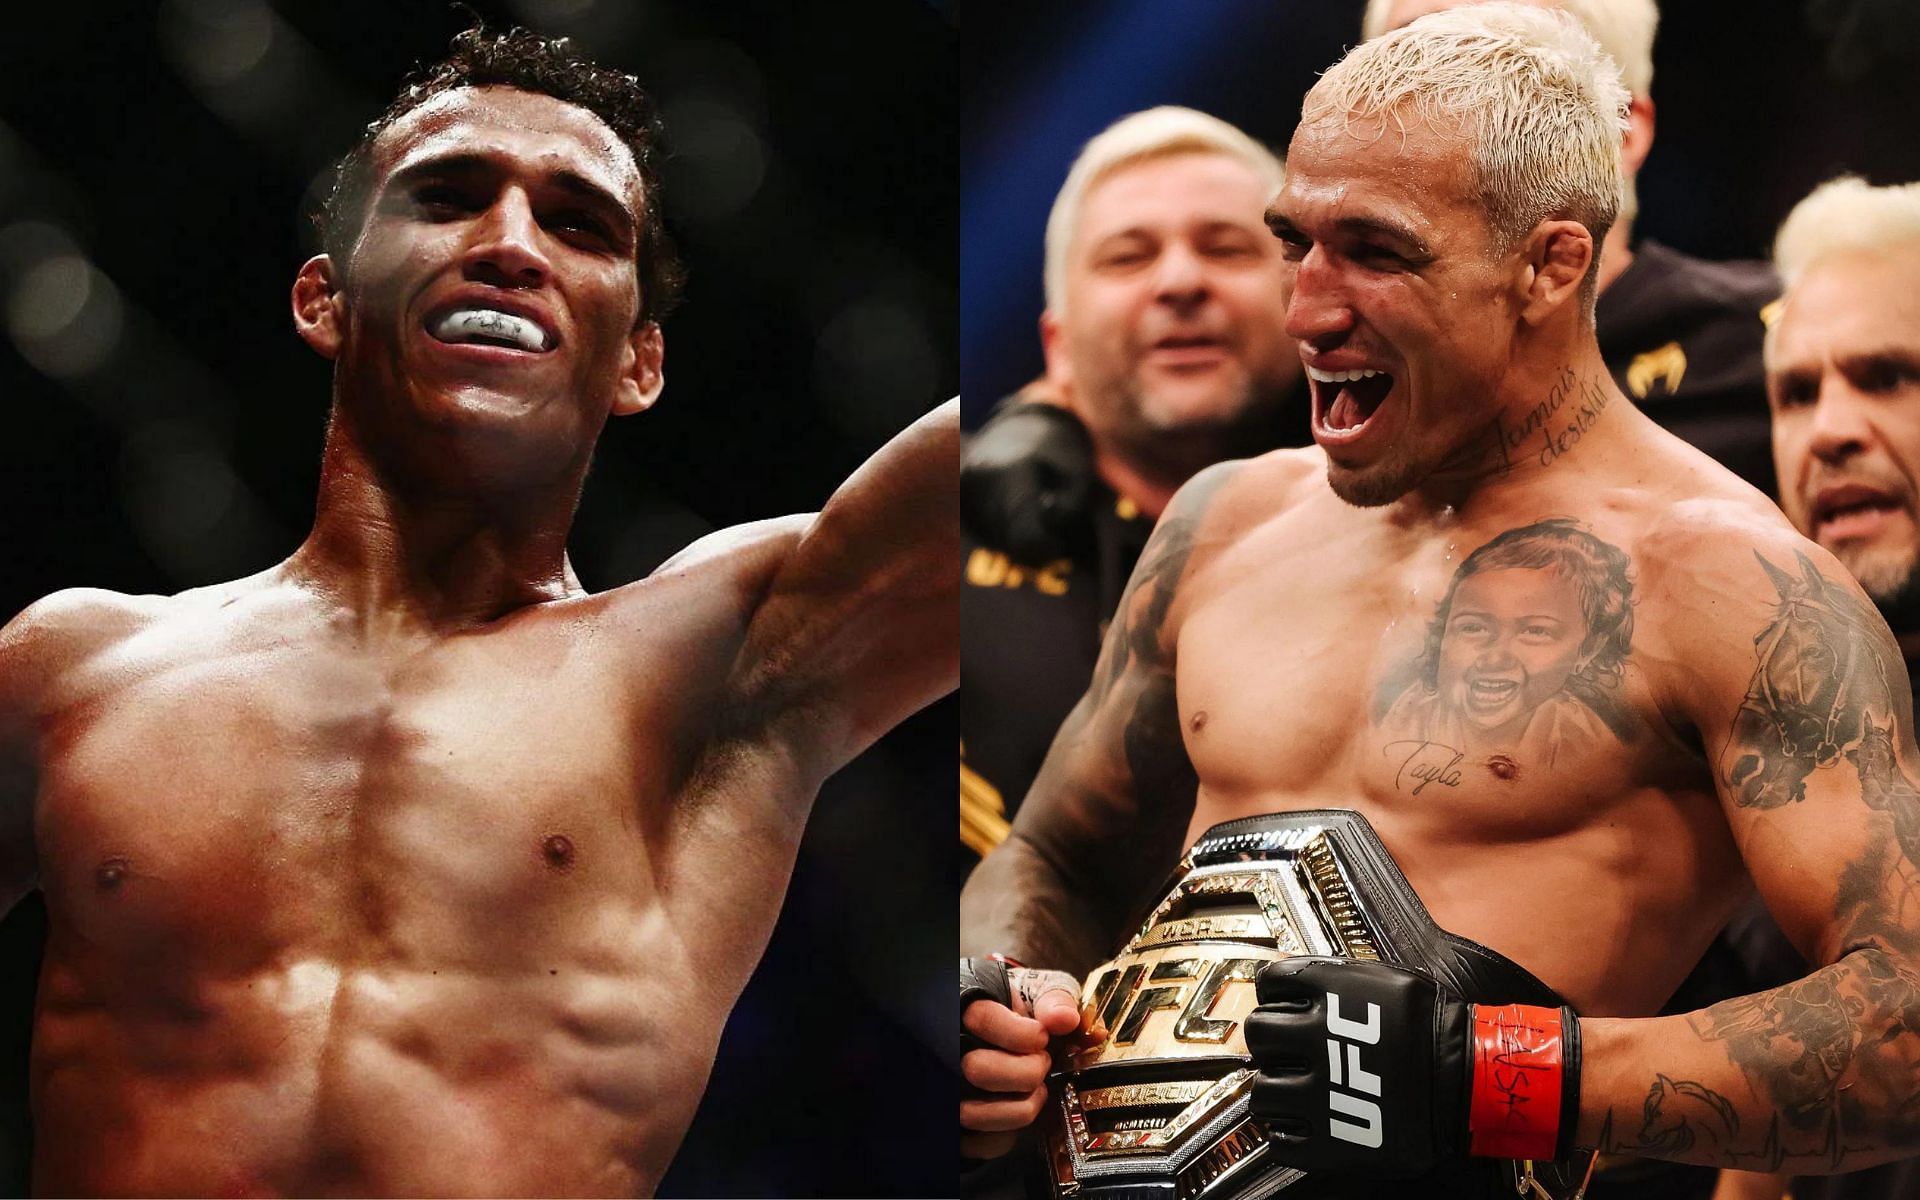 Charles Oliveira shares a video of his championship journey